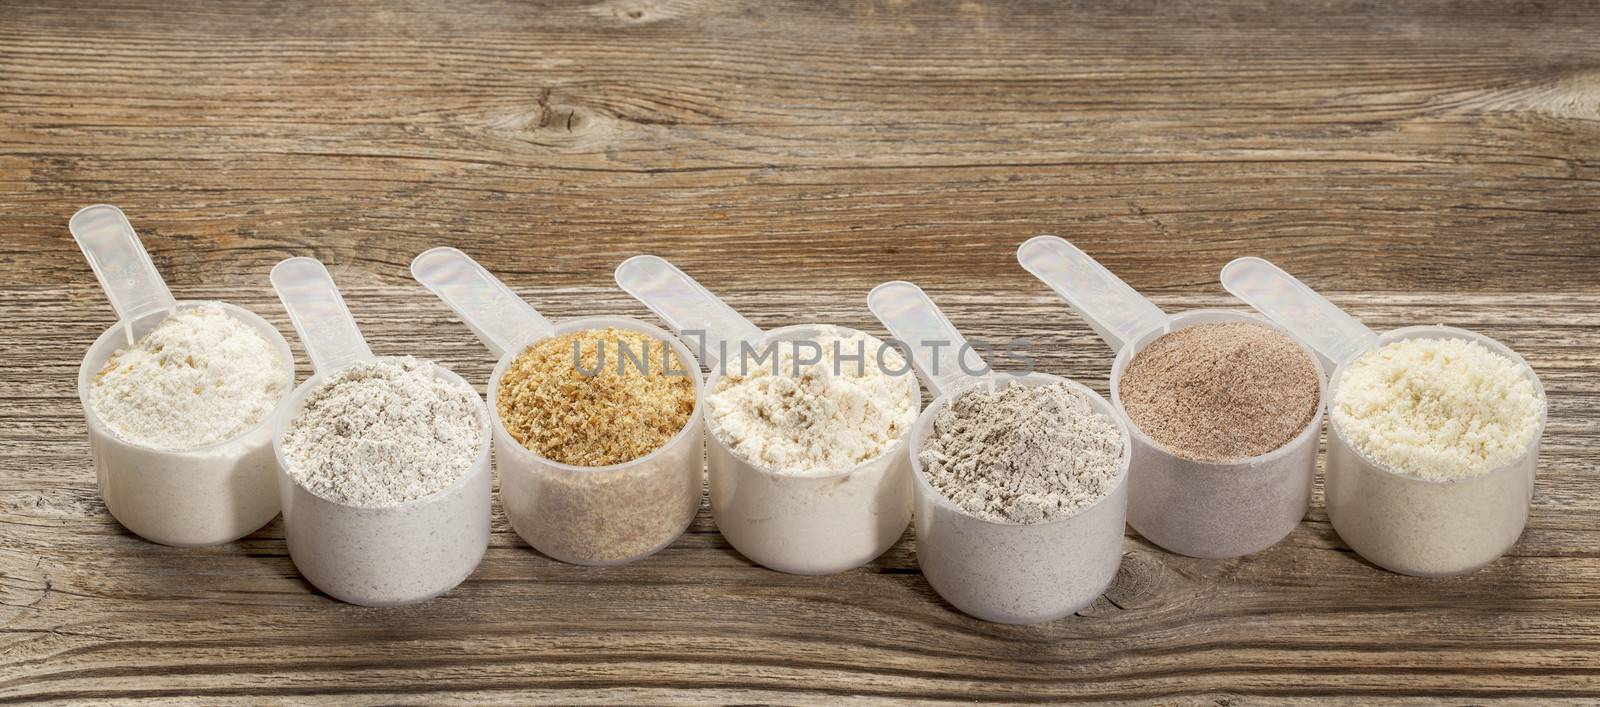 a row of measuring scoops of gluten free flours - almond, coconut, teff, flaxseed meal, whole rice, brown rice, buckwheat